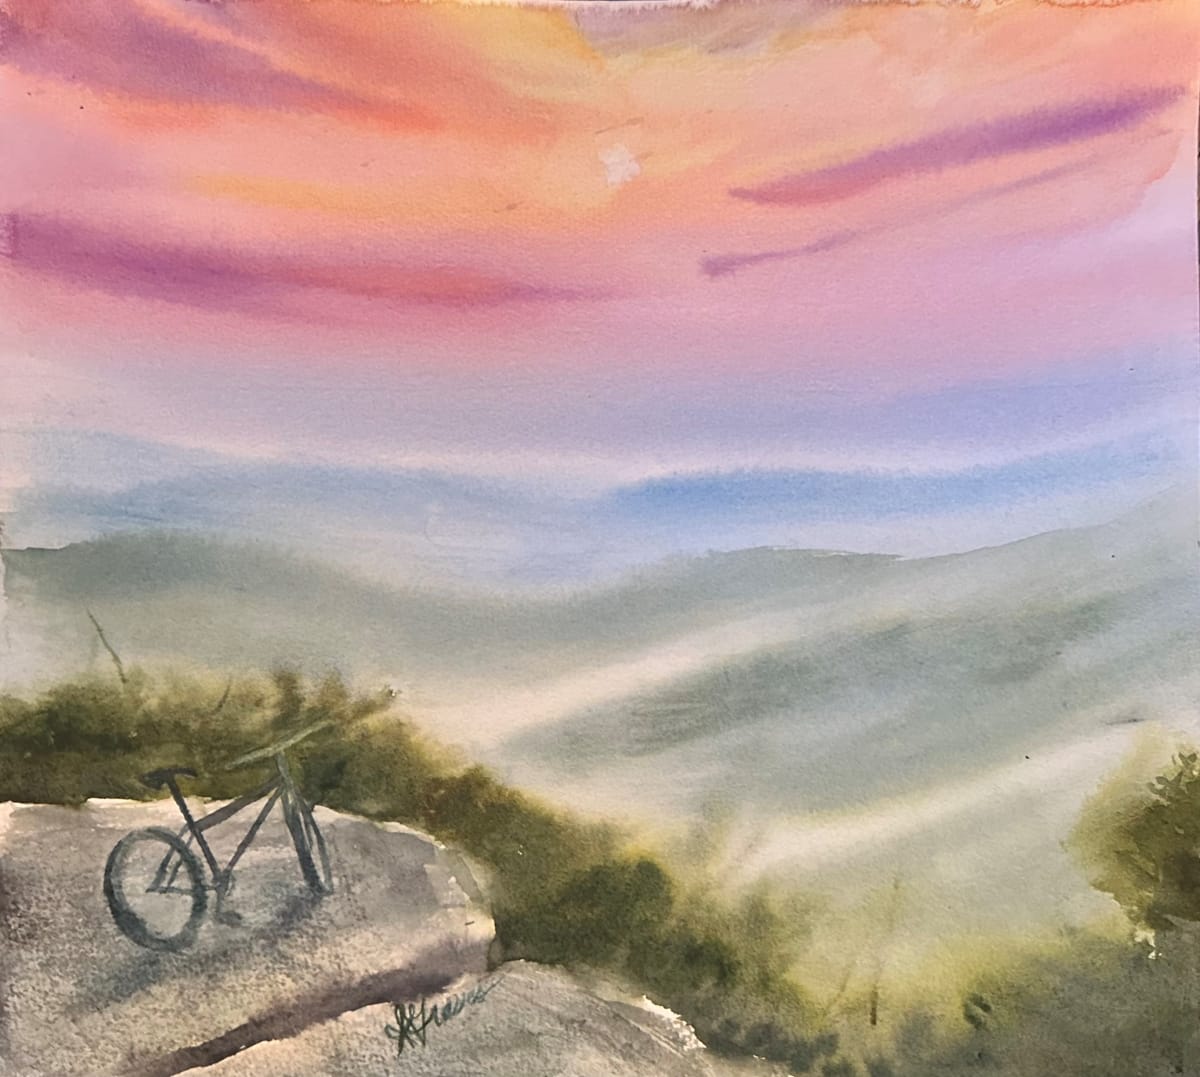 Hills of Arkansas by Sarah Graves  Image: inspired by mountain bike rides and sunsets